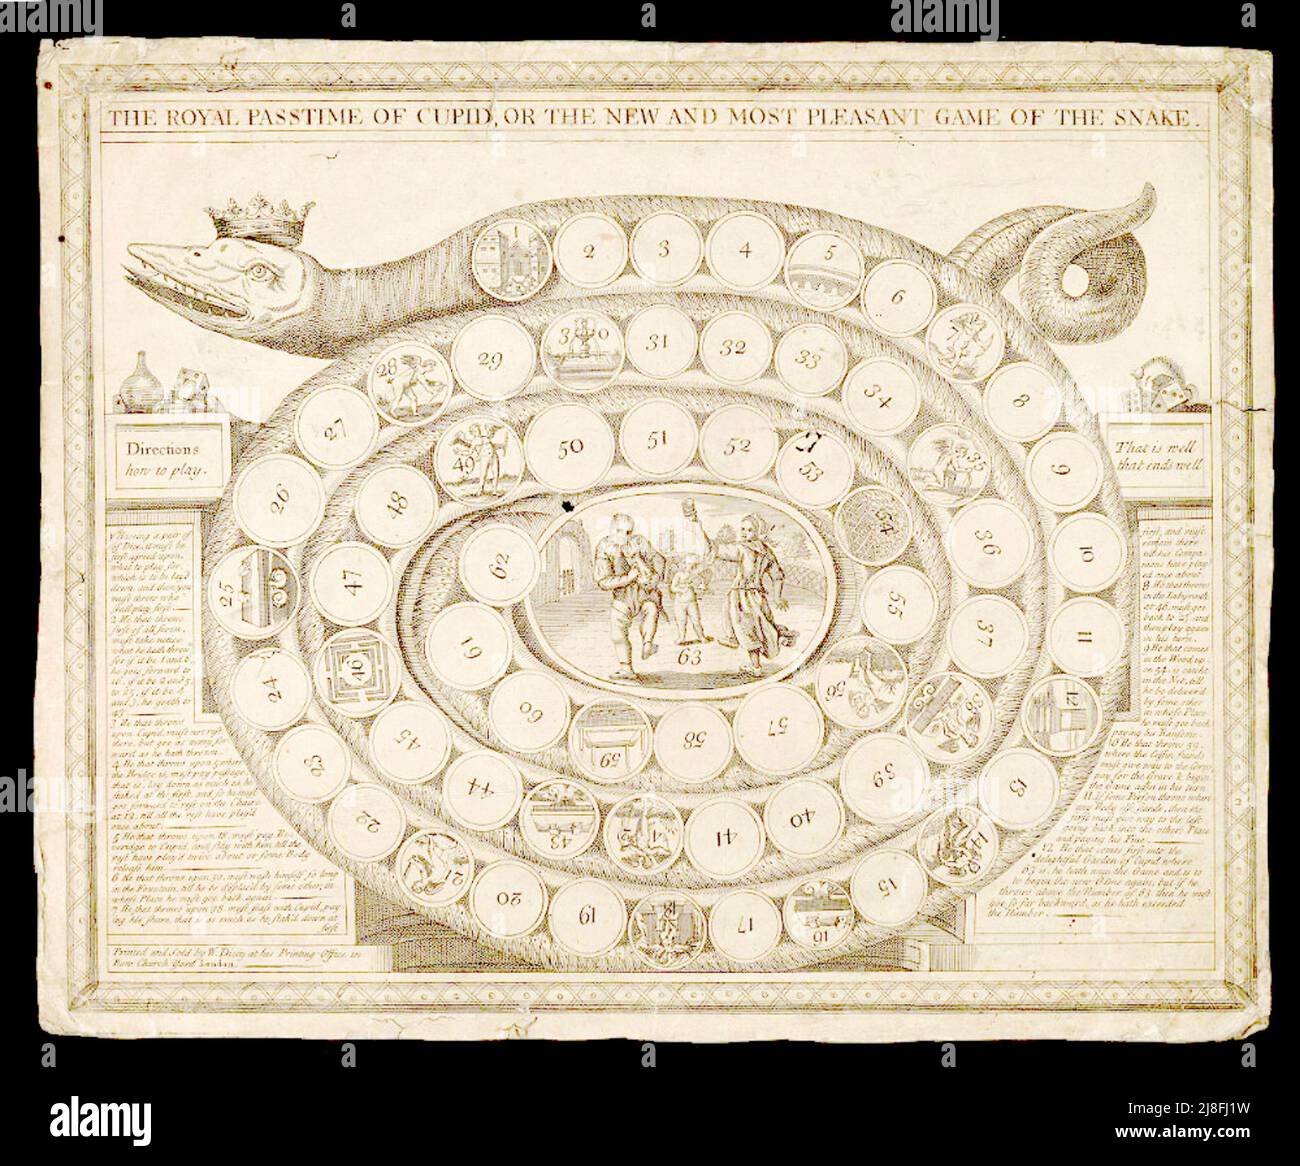 Royal Pastime of Cupid or The New and Most Pleasant Game of the Snake - c1750 Stock Photo